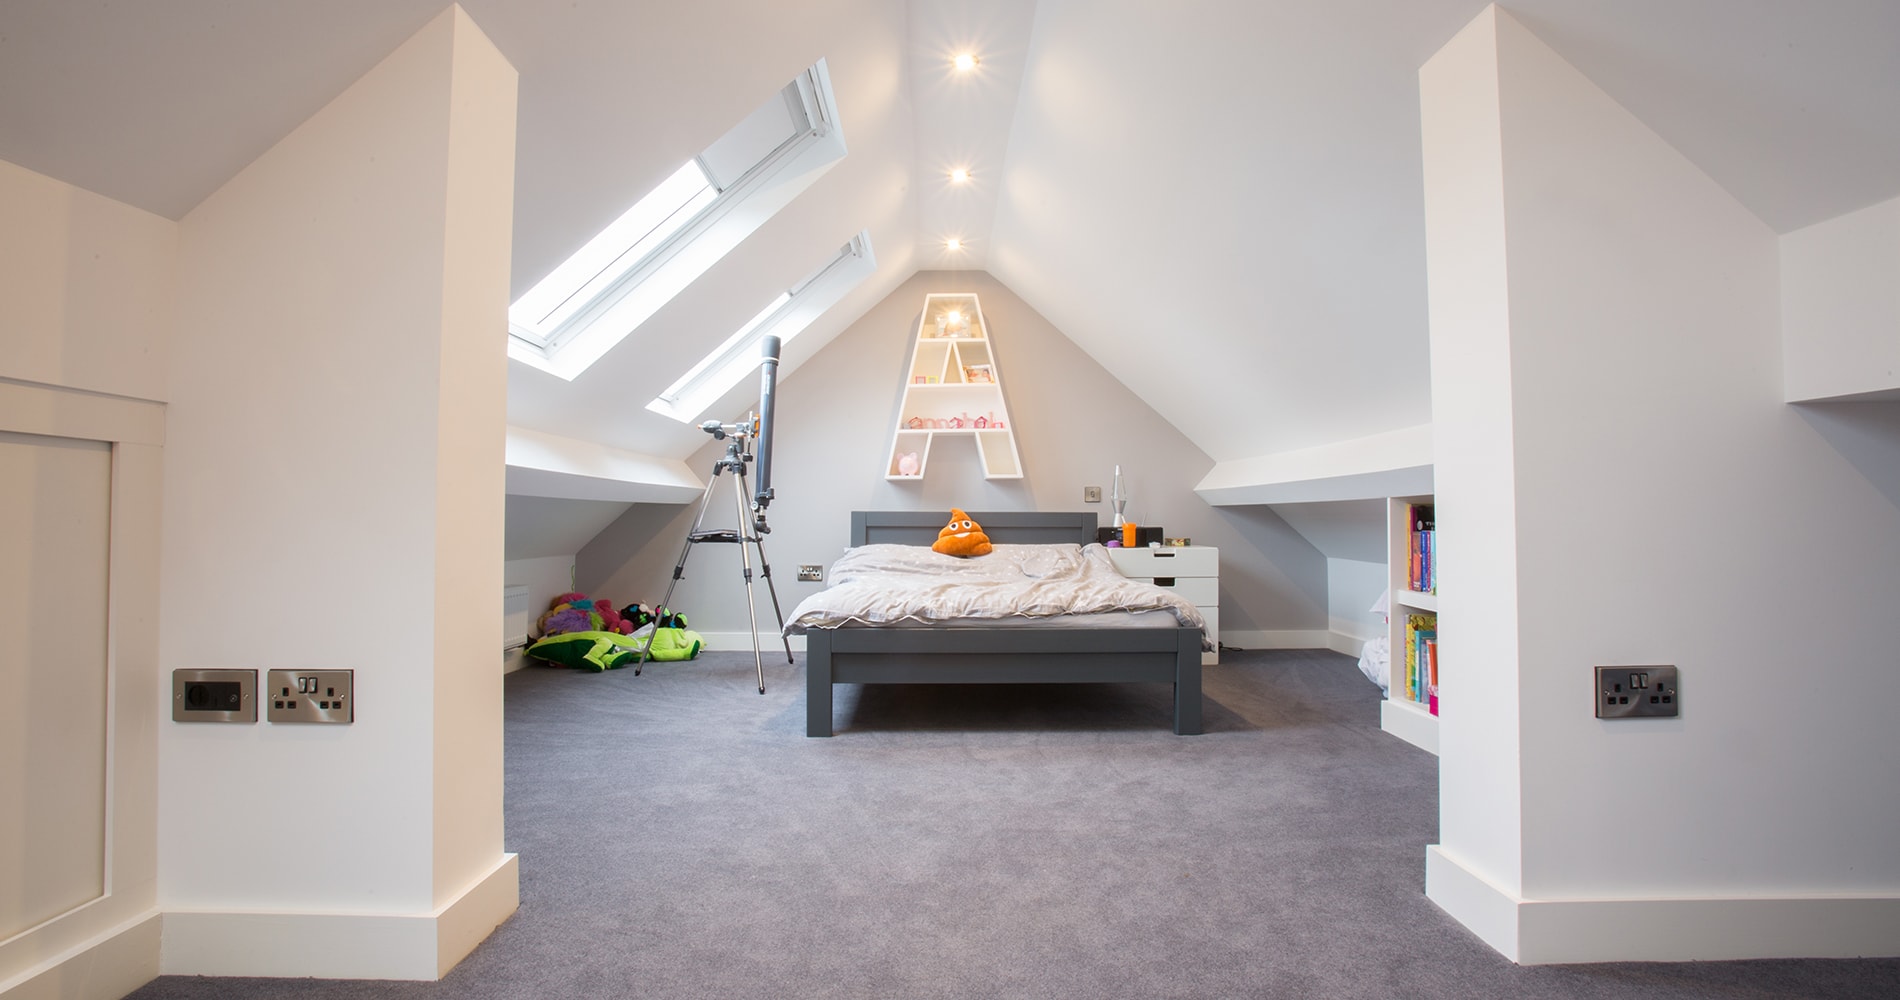 How Much Does It Cost To Finish An Attic